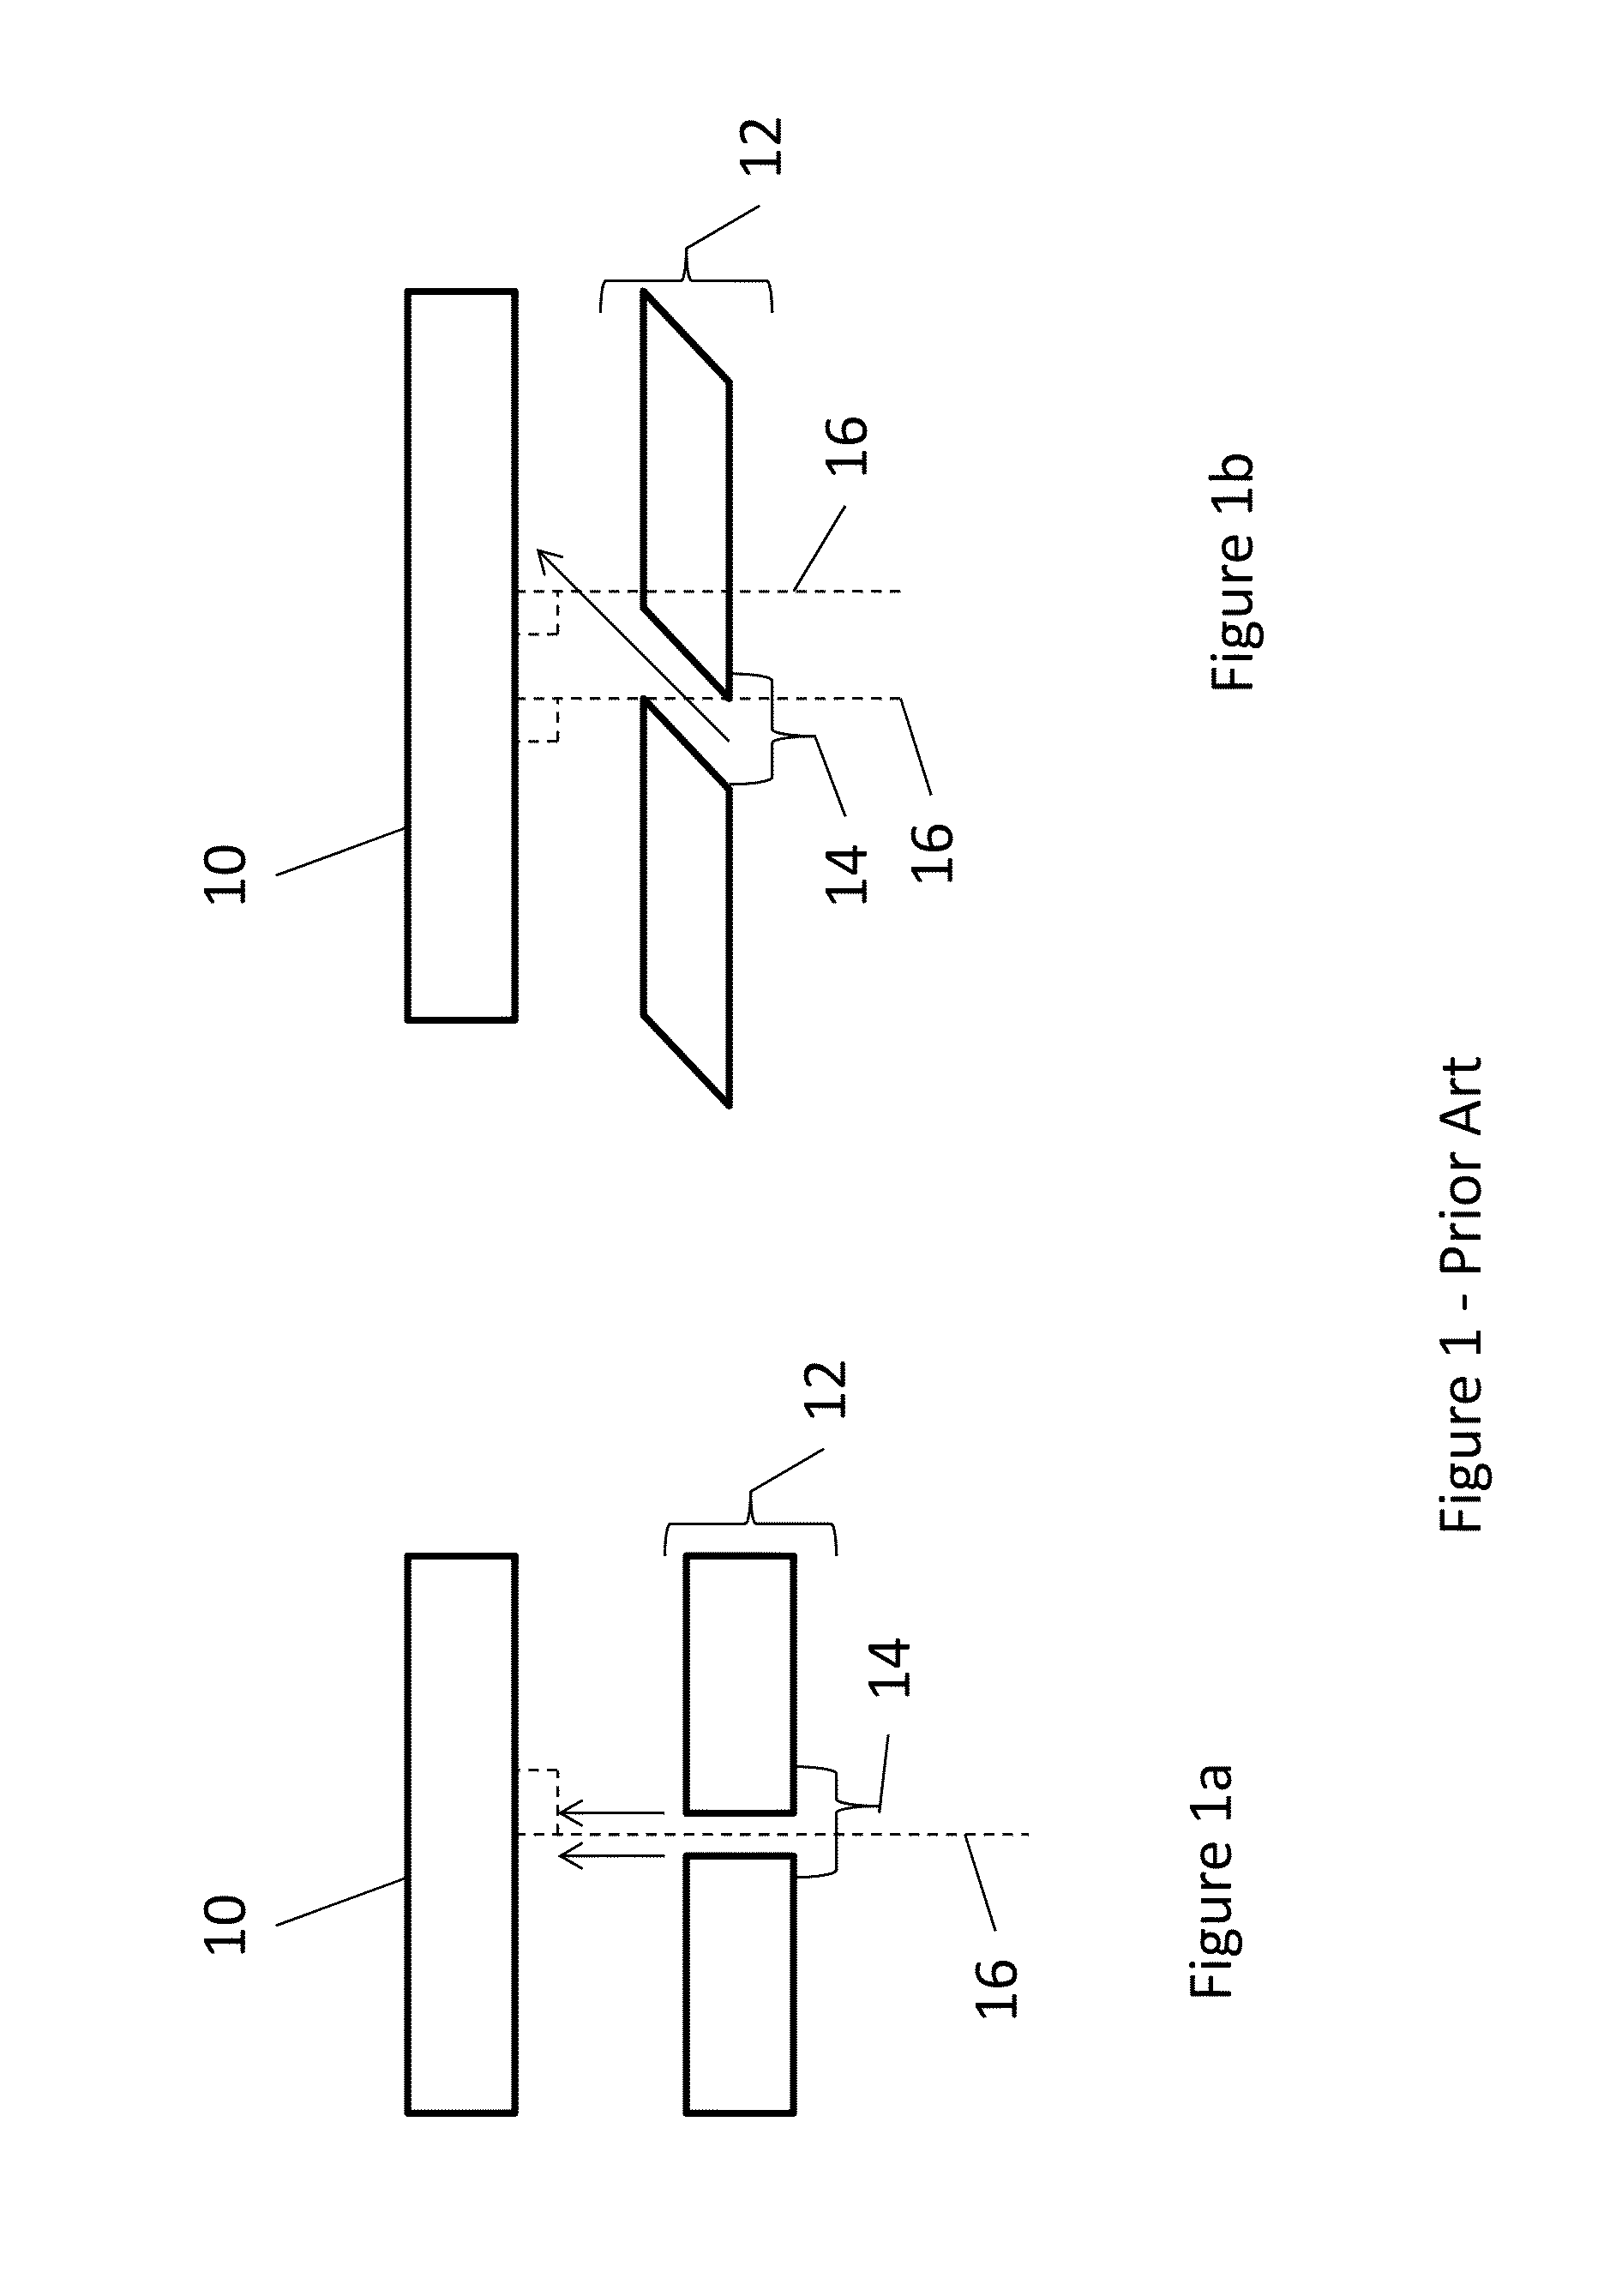 Atomic-layer deposition substrate